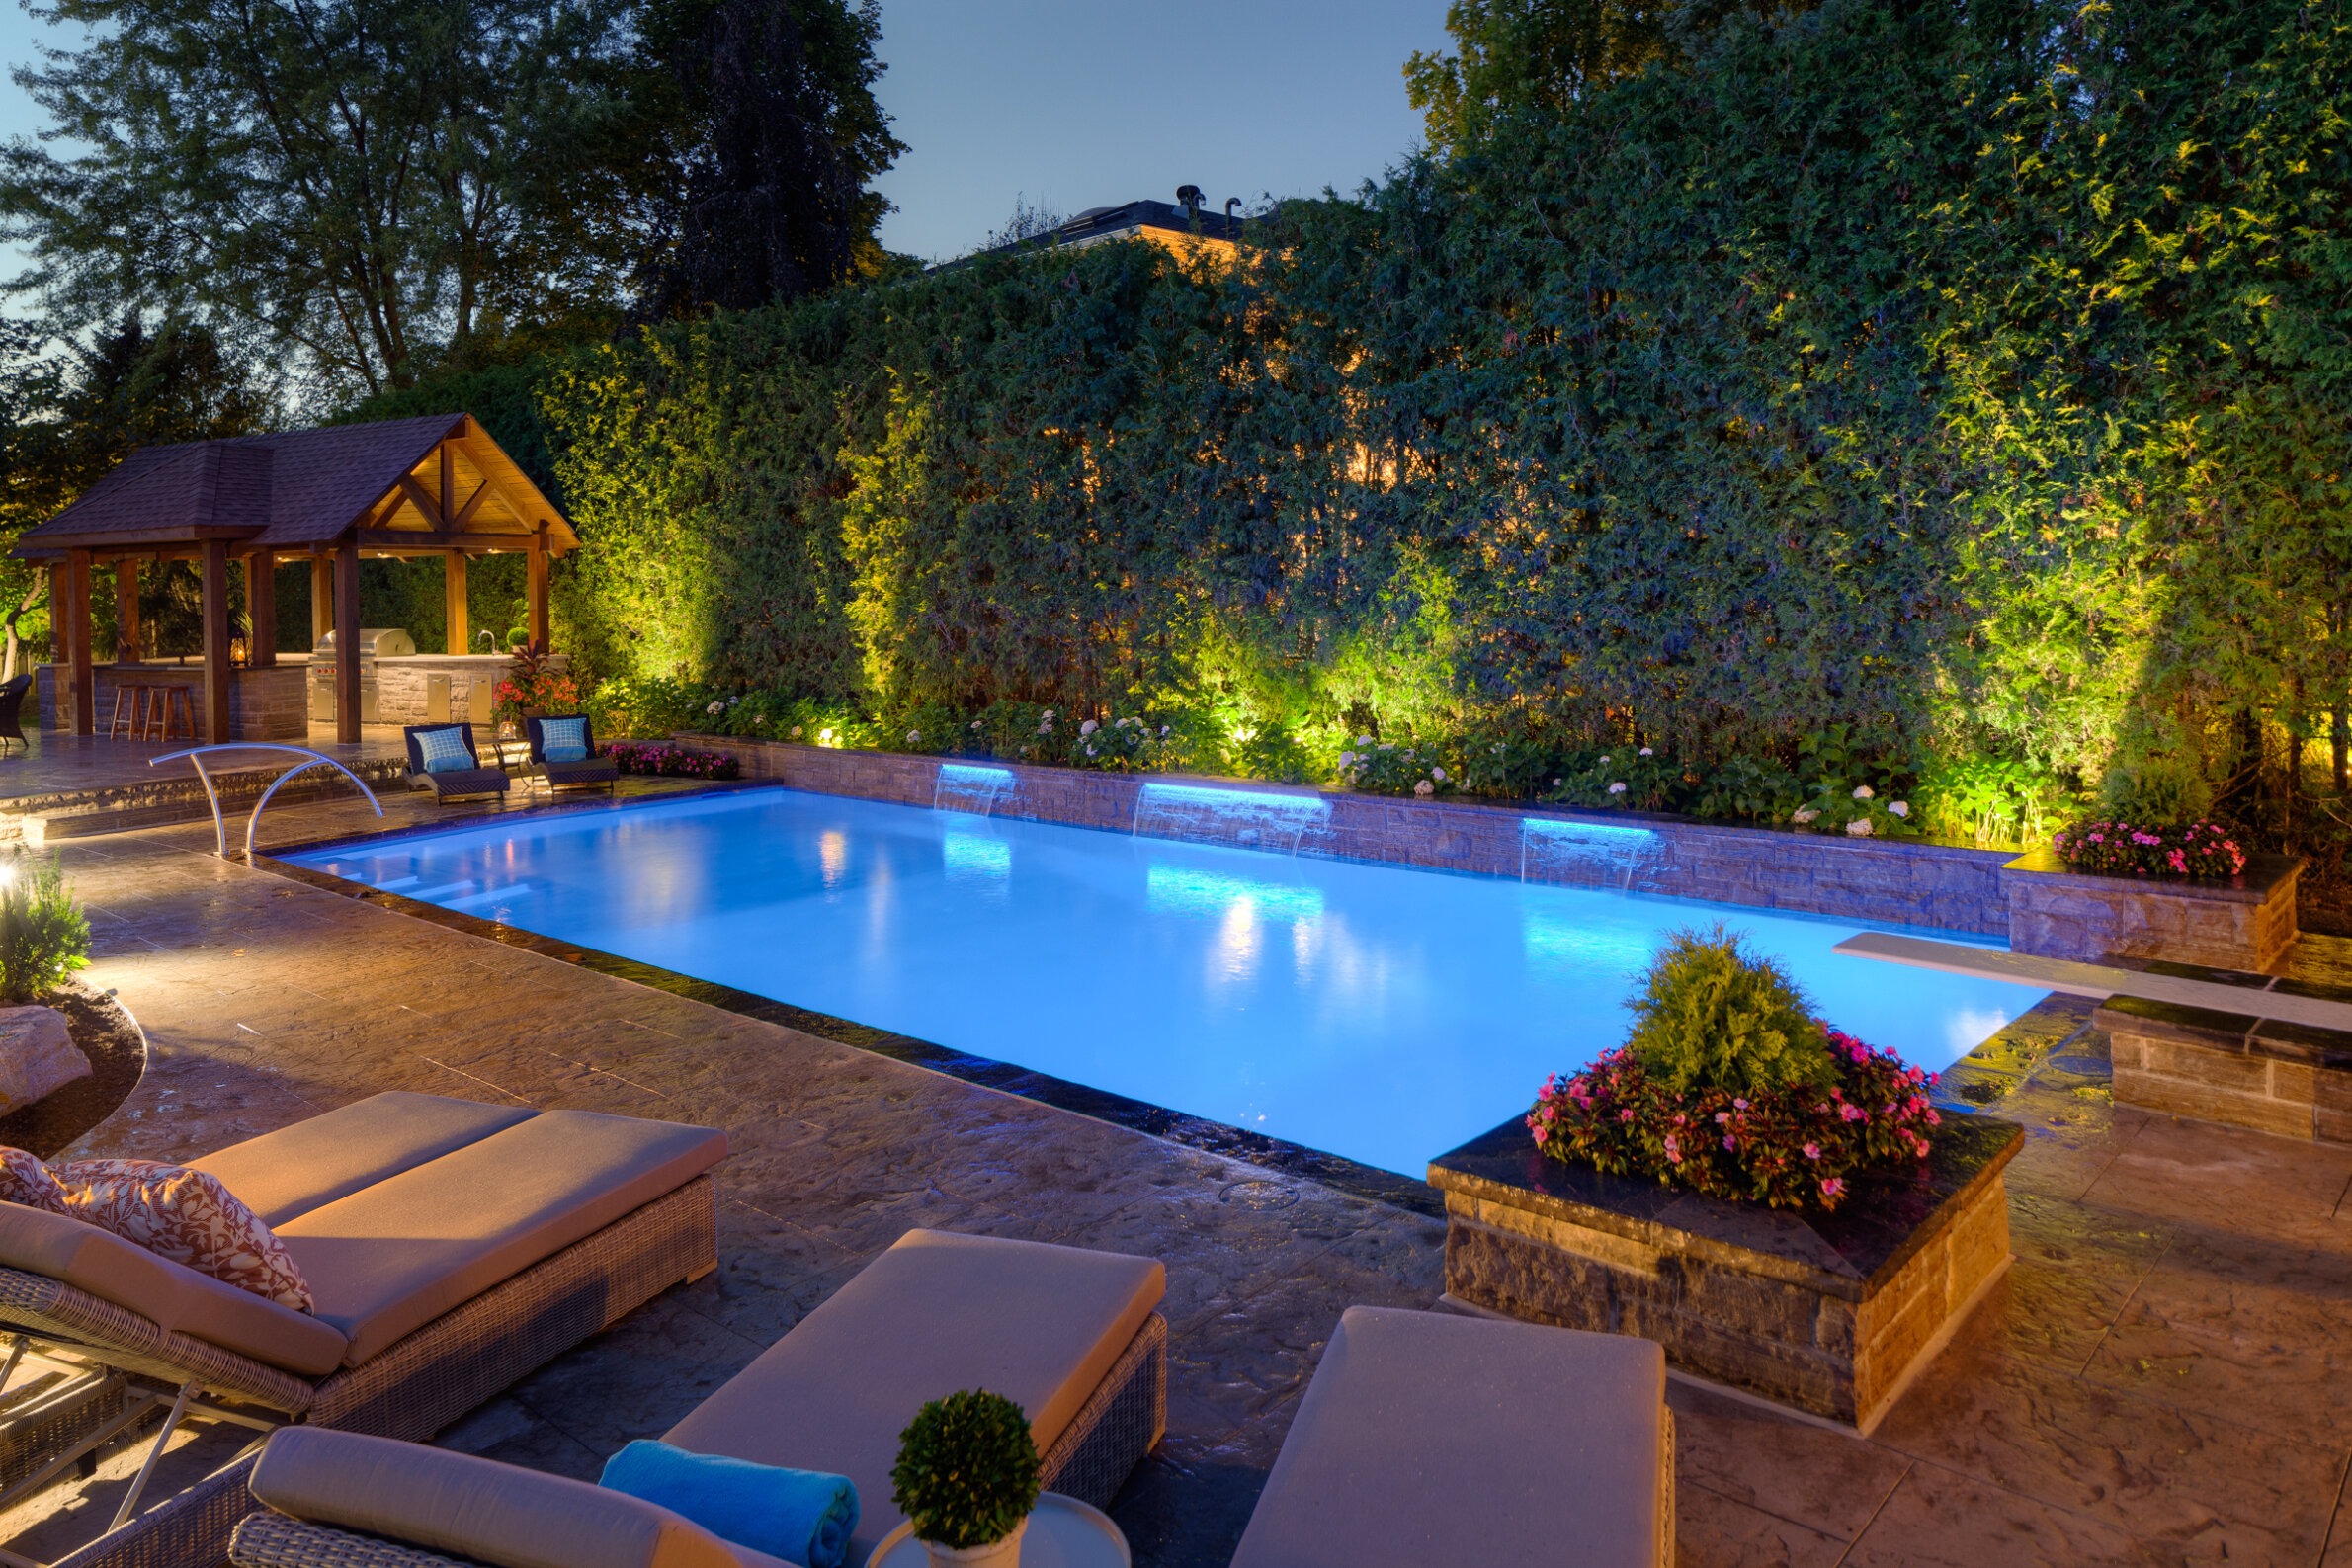 An outdoor swimming pool illuminated at dusk with underwater lights, surrounded by loungers, plants, a gazebo, and a stone patio.